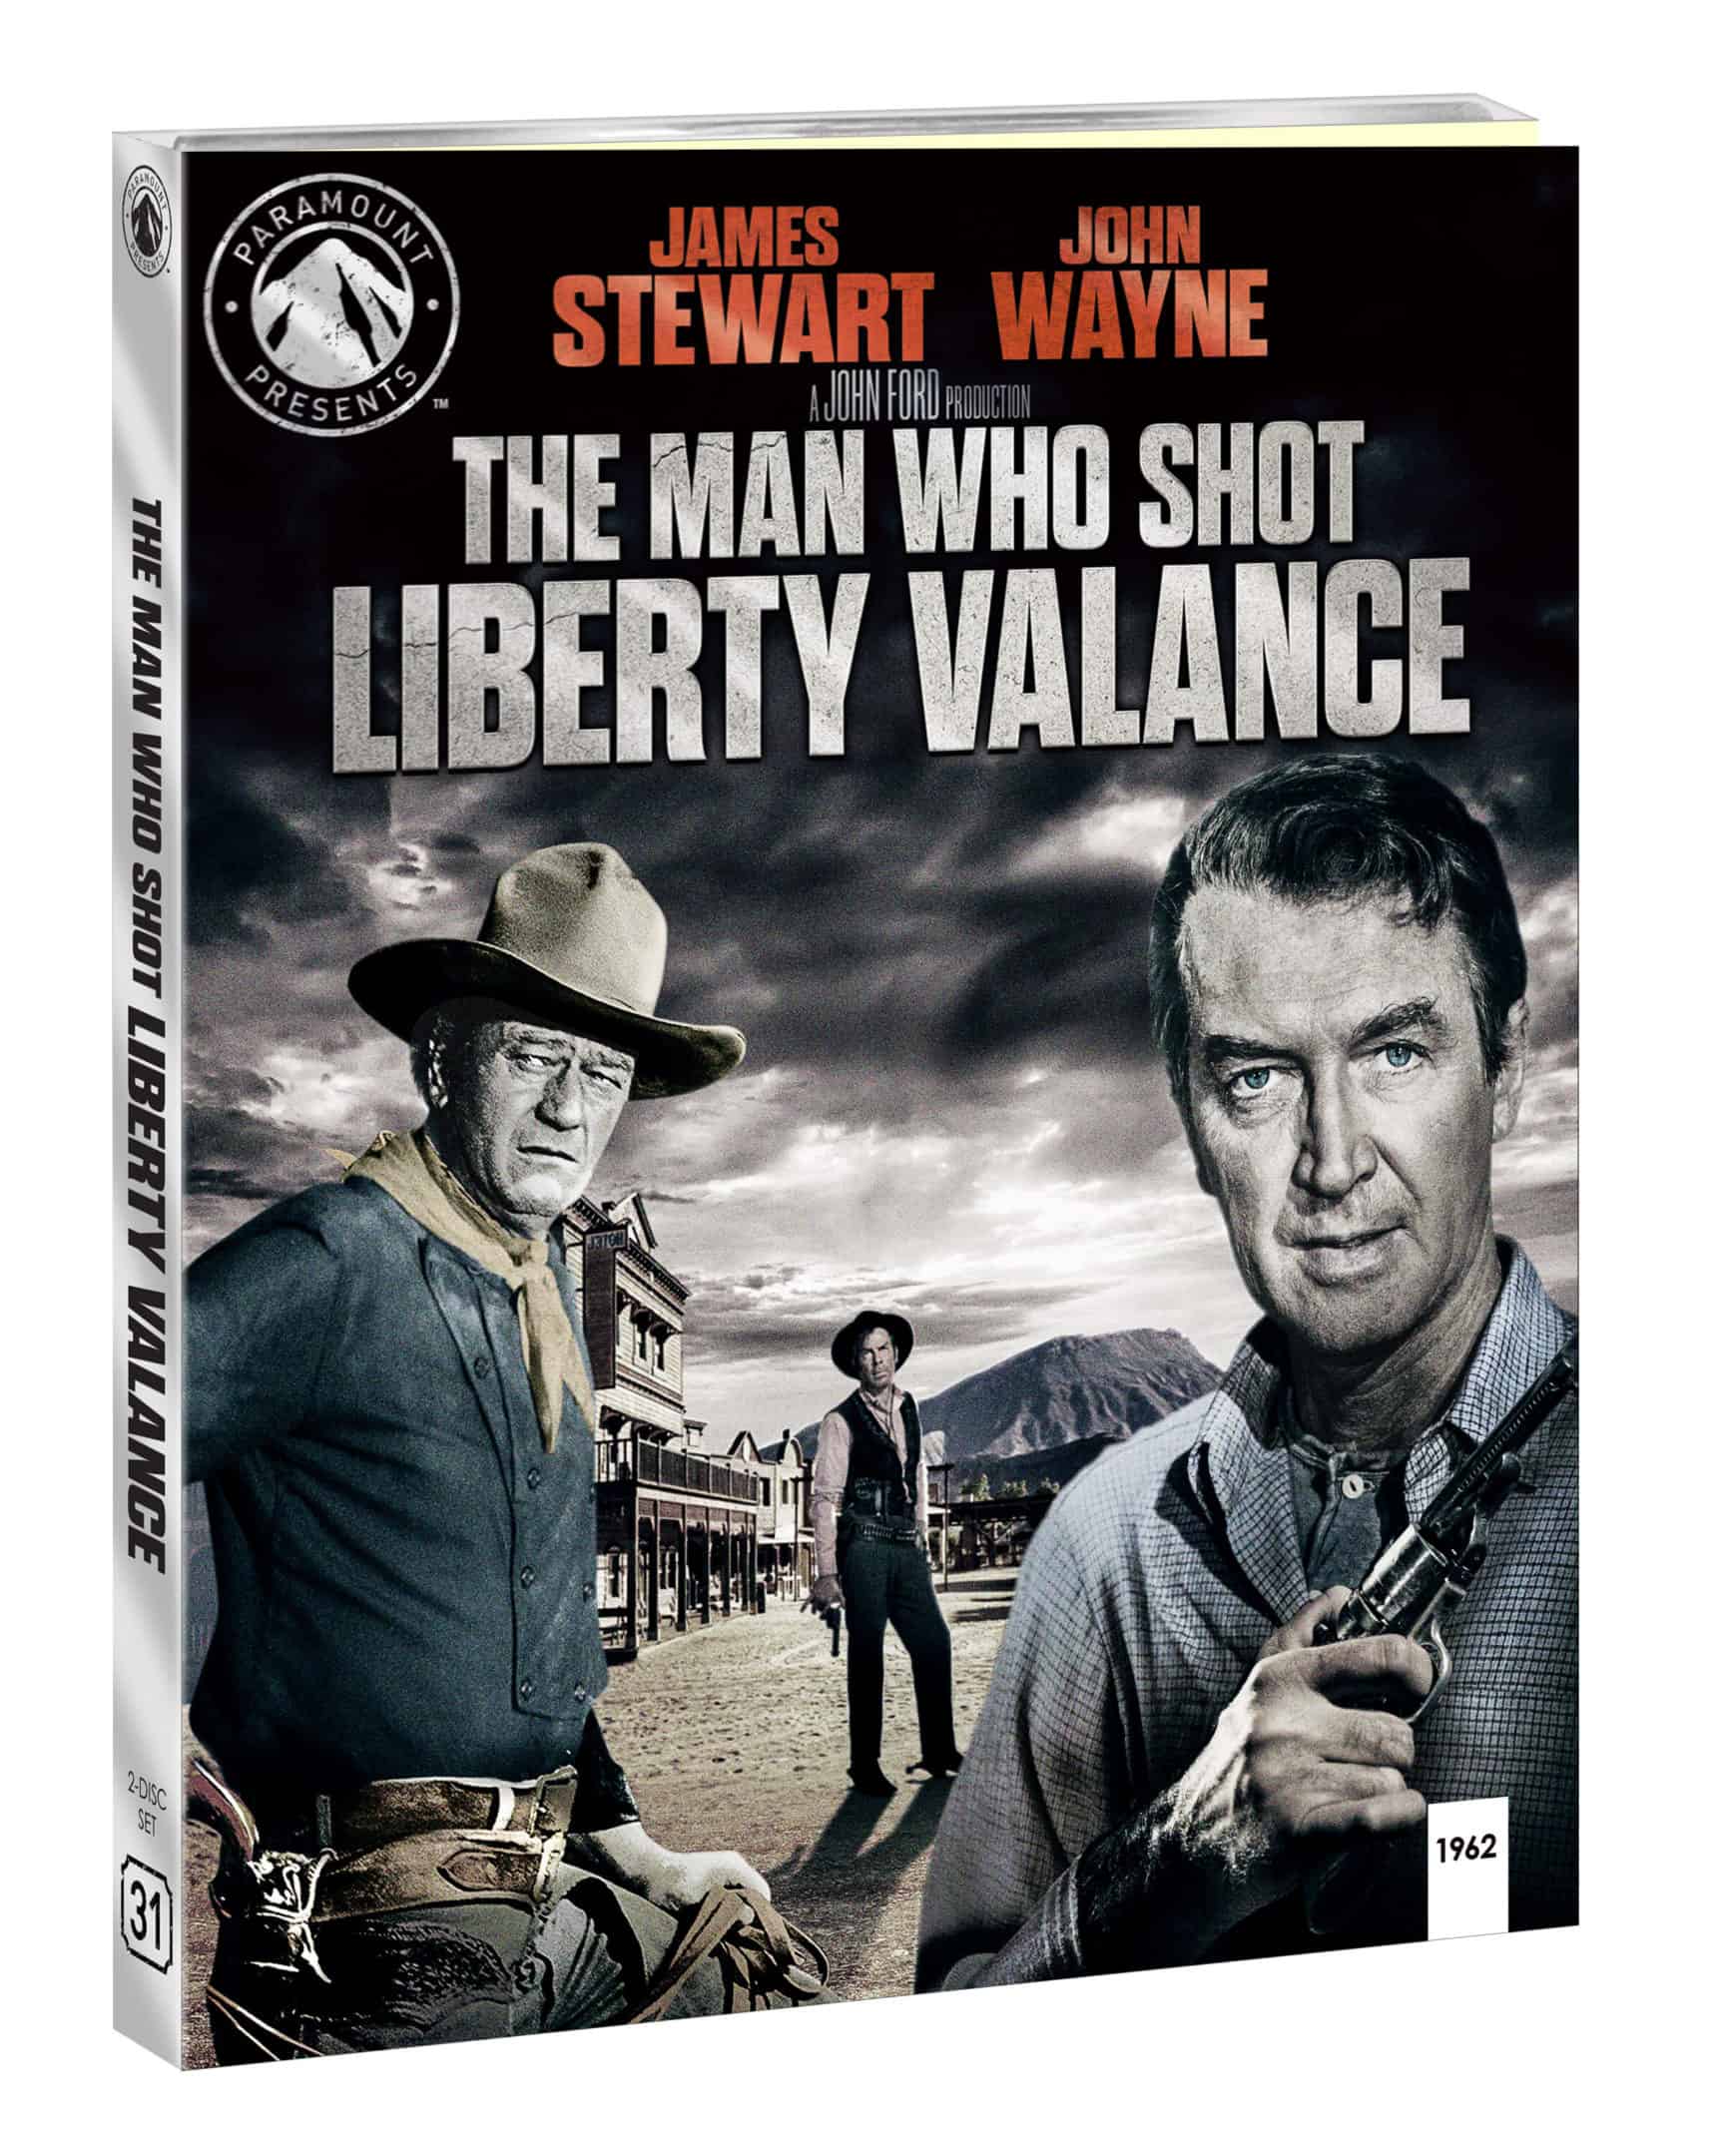 The Man Who Shot Liberty Valence comes to 4K UHD on May 17th 1